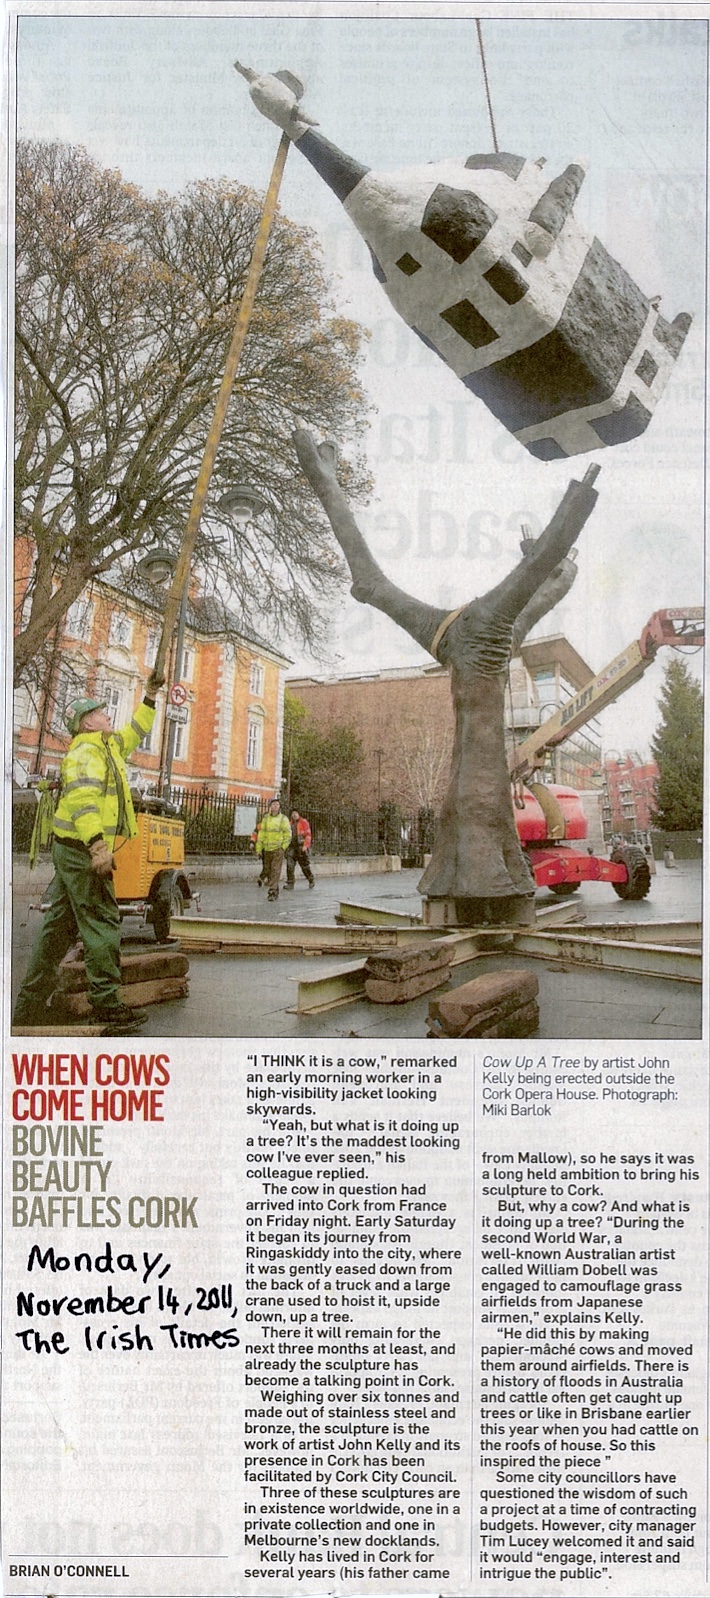 Brian O’Connell, ‘When cows come home: bovine beauty baffles Cork’, Irish Times, 14 November 2011; newspaper article with image of Cow up a Tree being installed outside the Crawford Art Gallery in Cork city